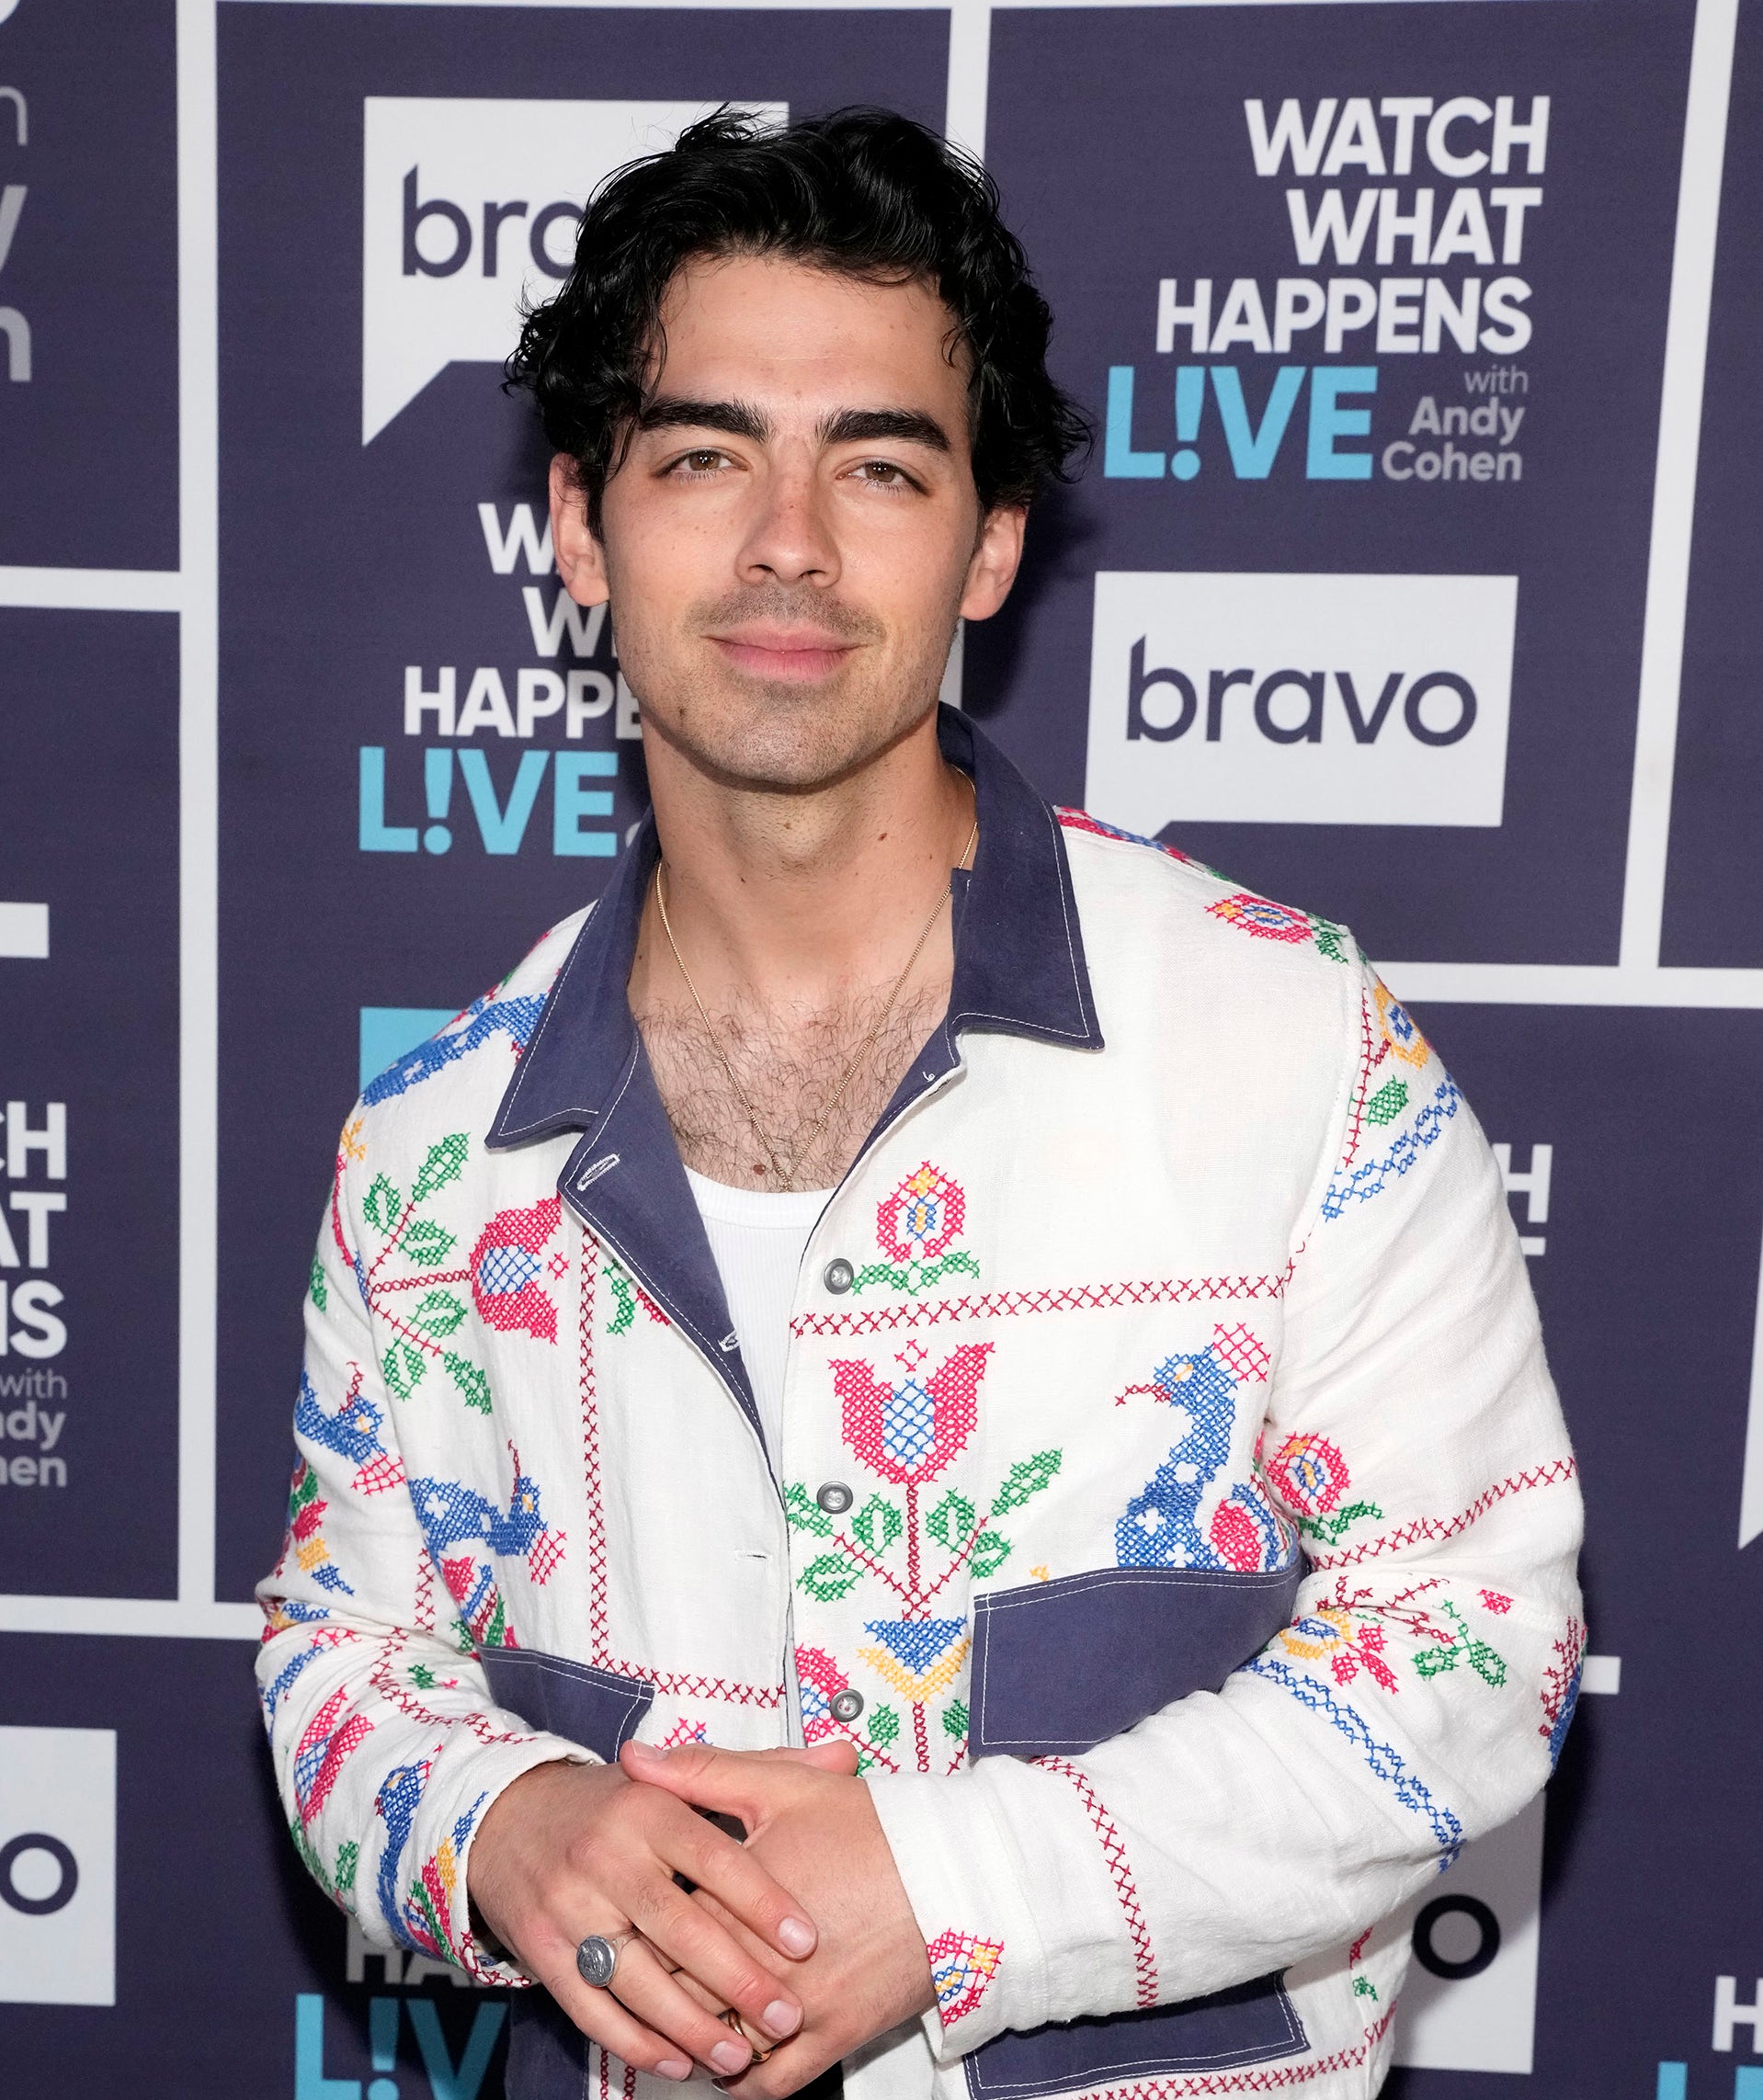 Joe Jonas smiles for the cameras on the red carpet while wearing an embroidered jacket